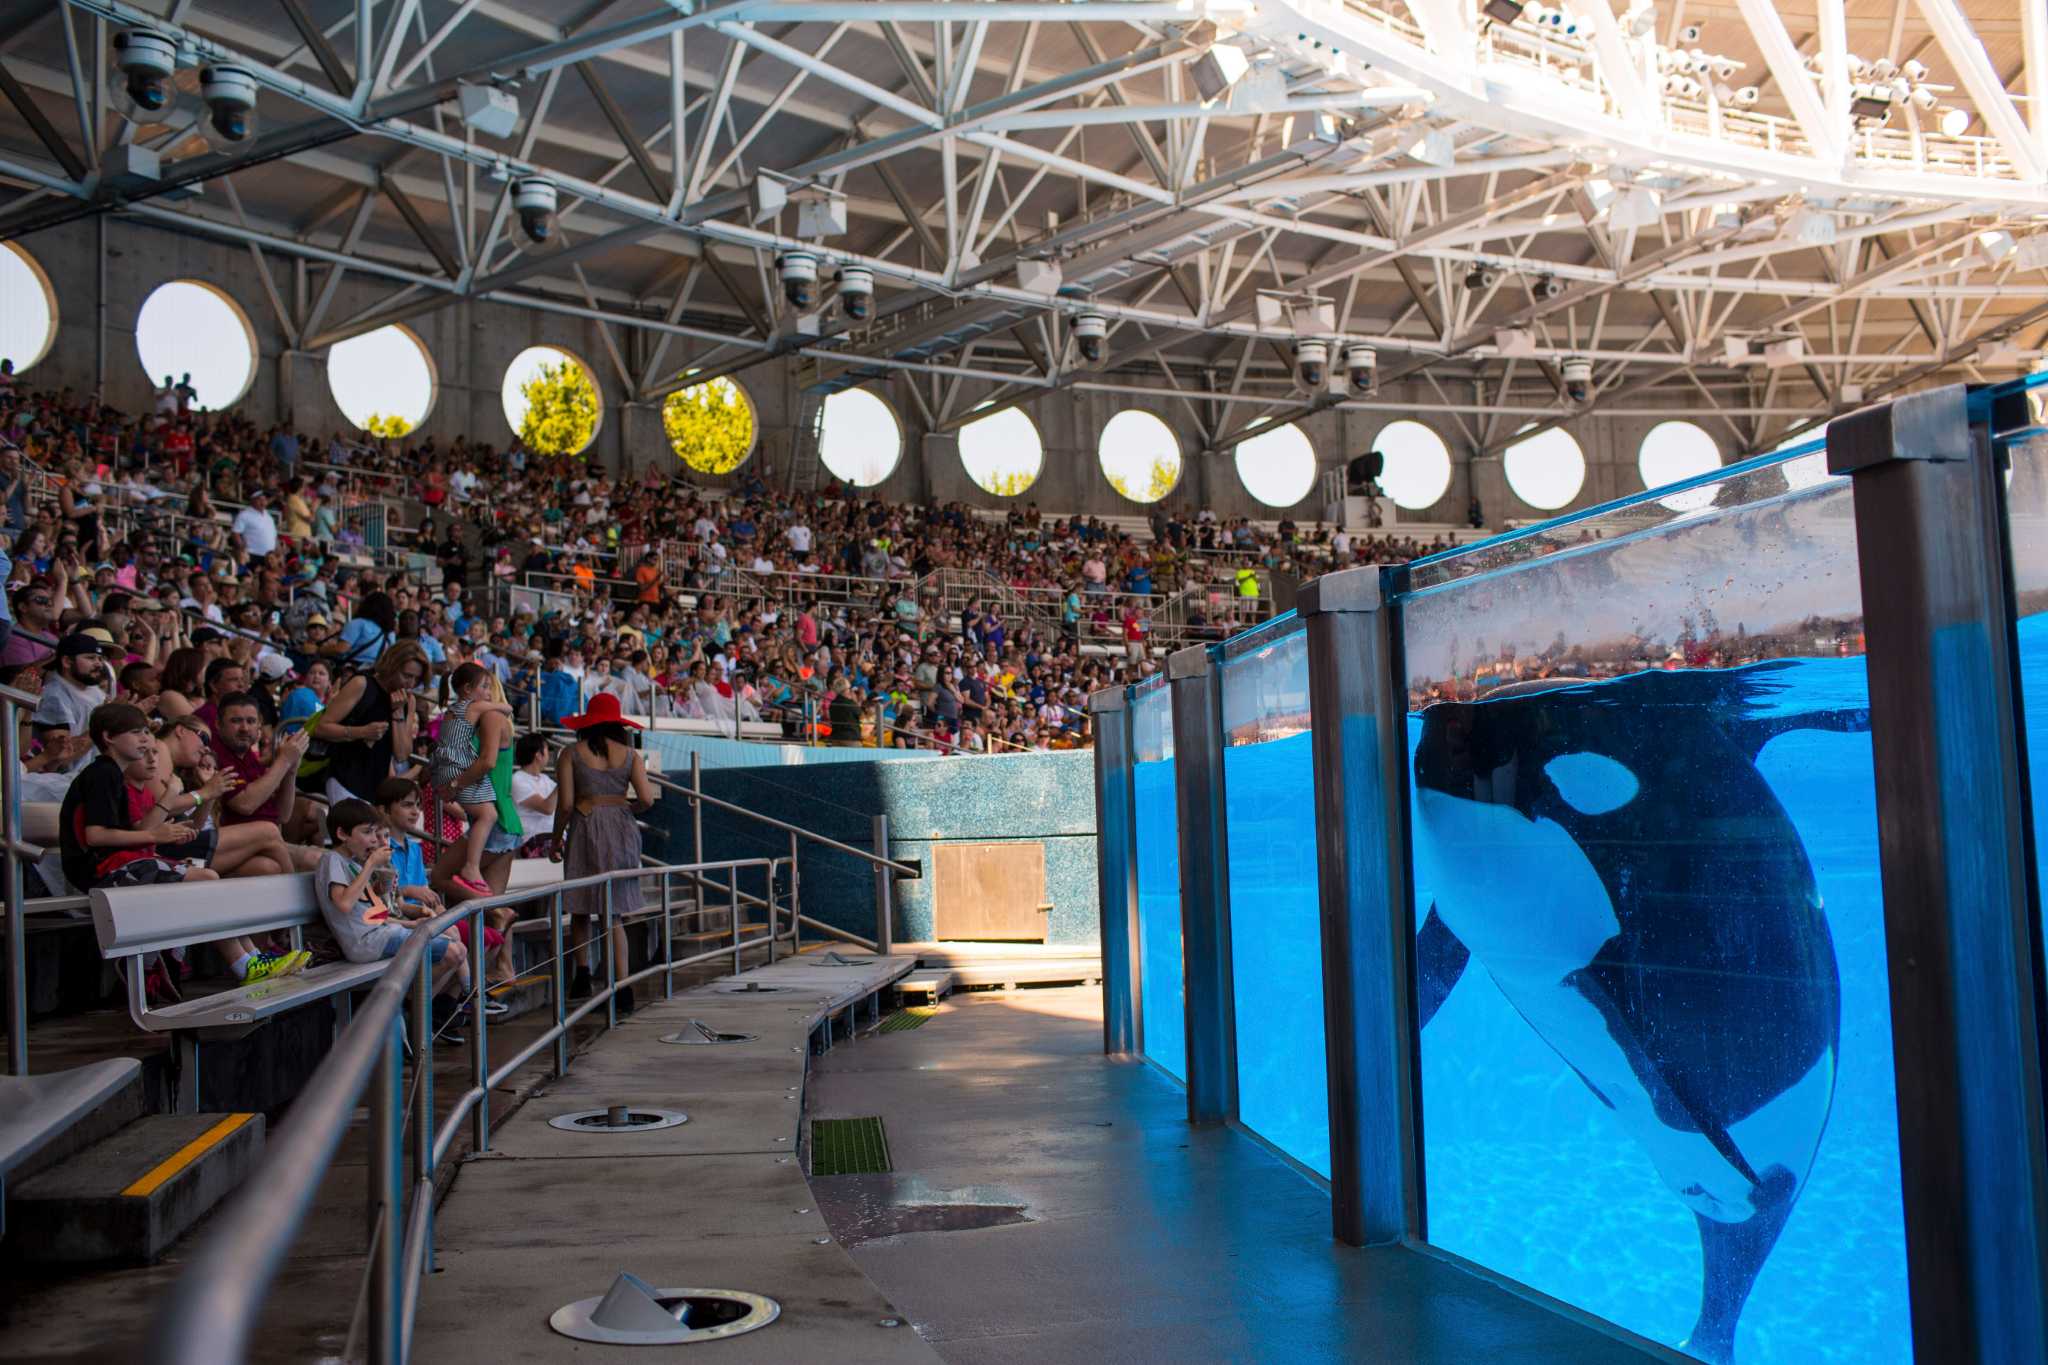 SeaWorld dividend cuts lead to stock woes, uncertainty - San Antonio Express-News